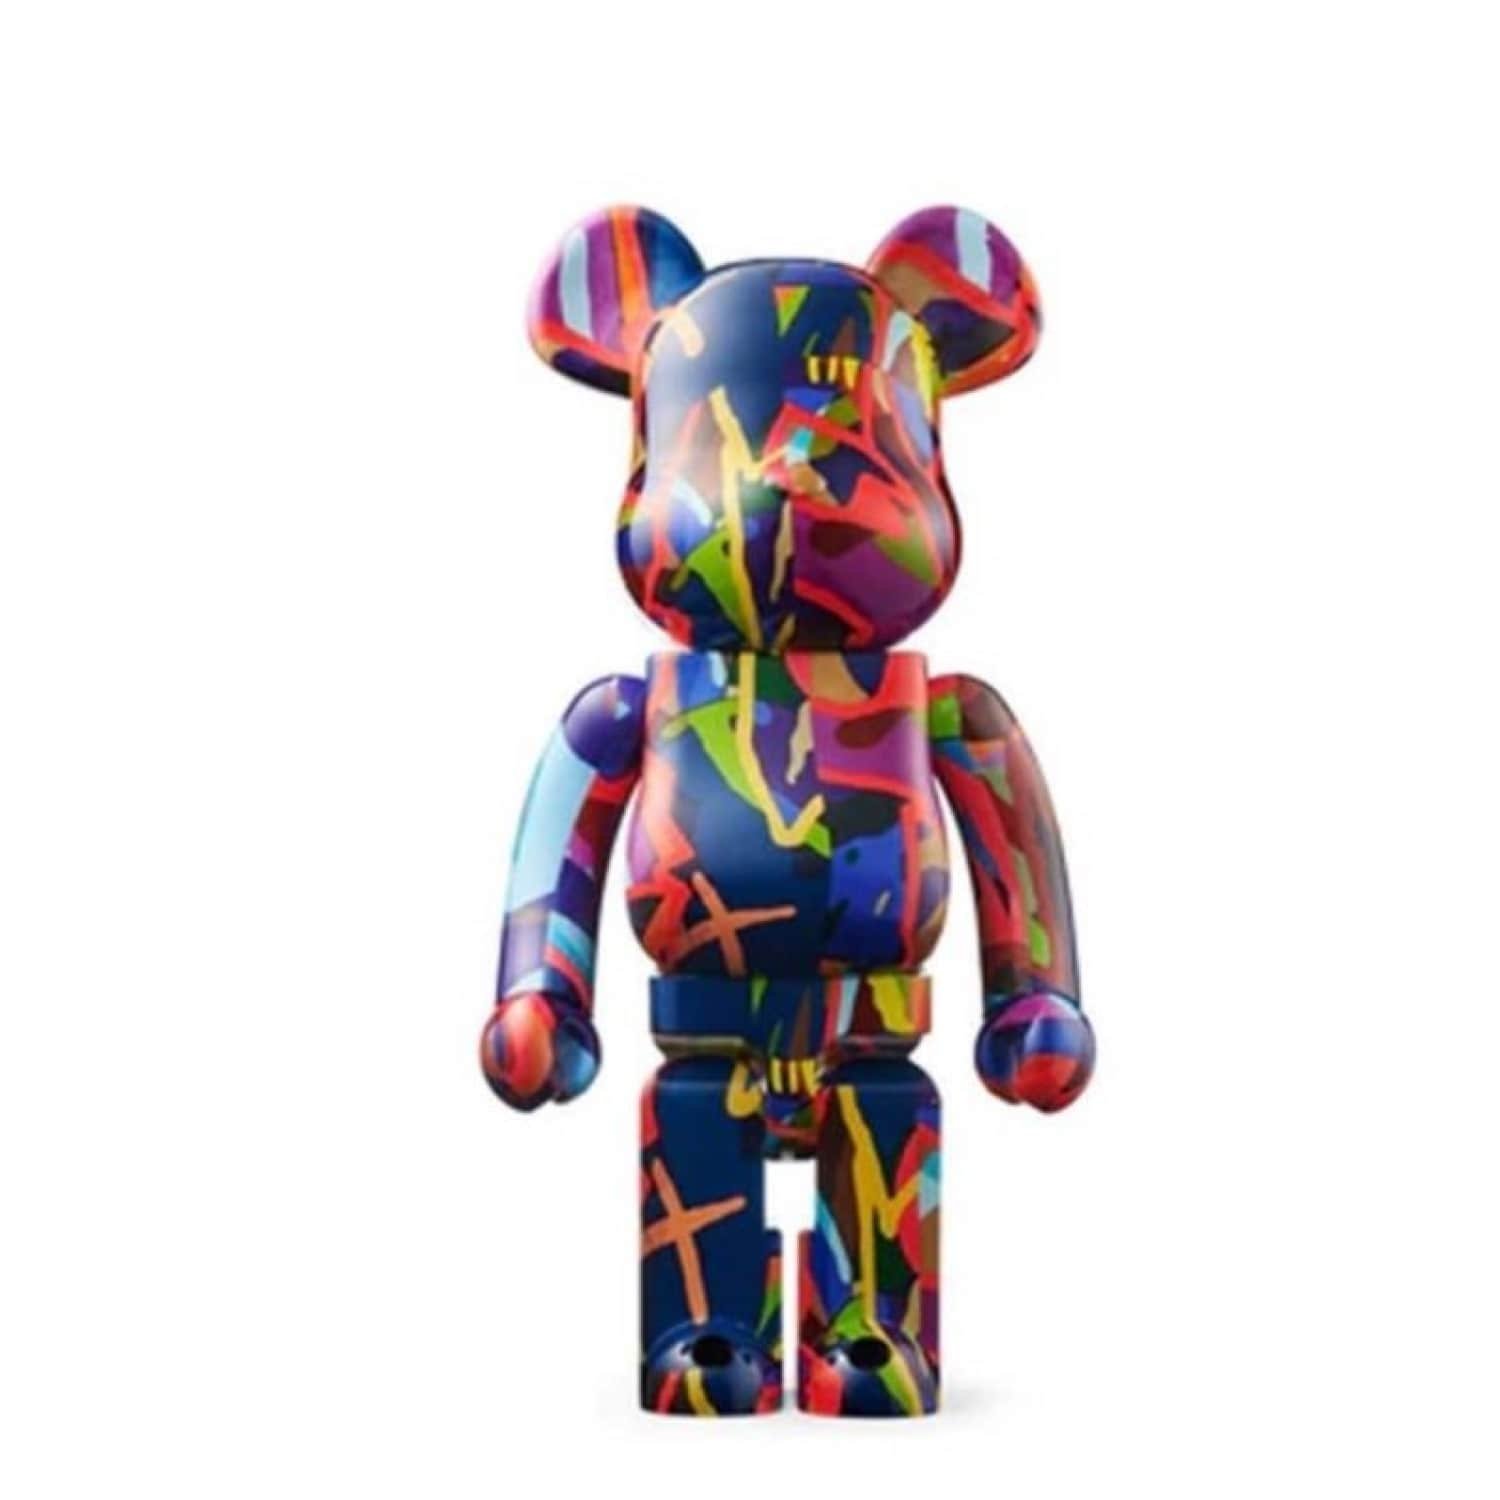 “Kaws Tension” from Be@rbrick - Dope! Gallery